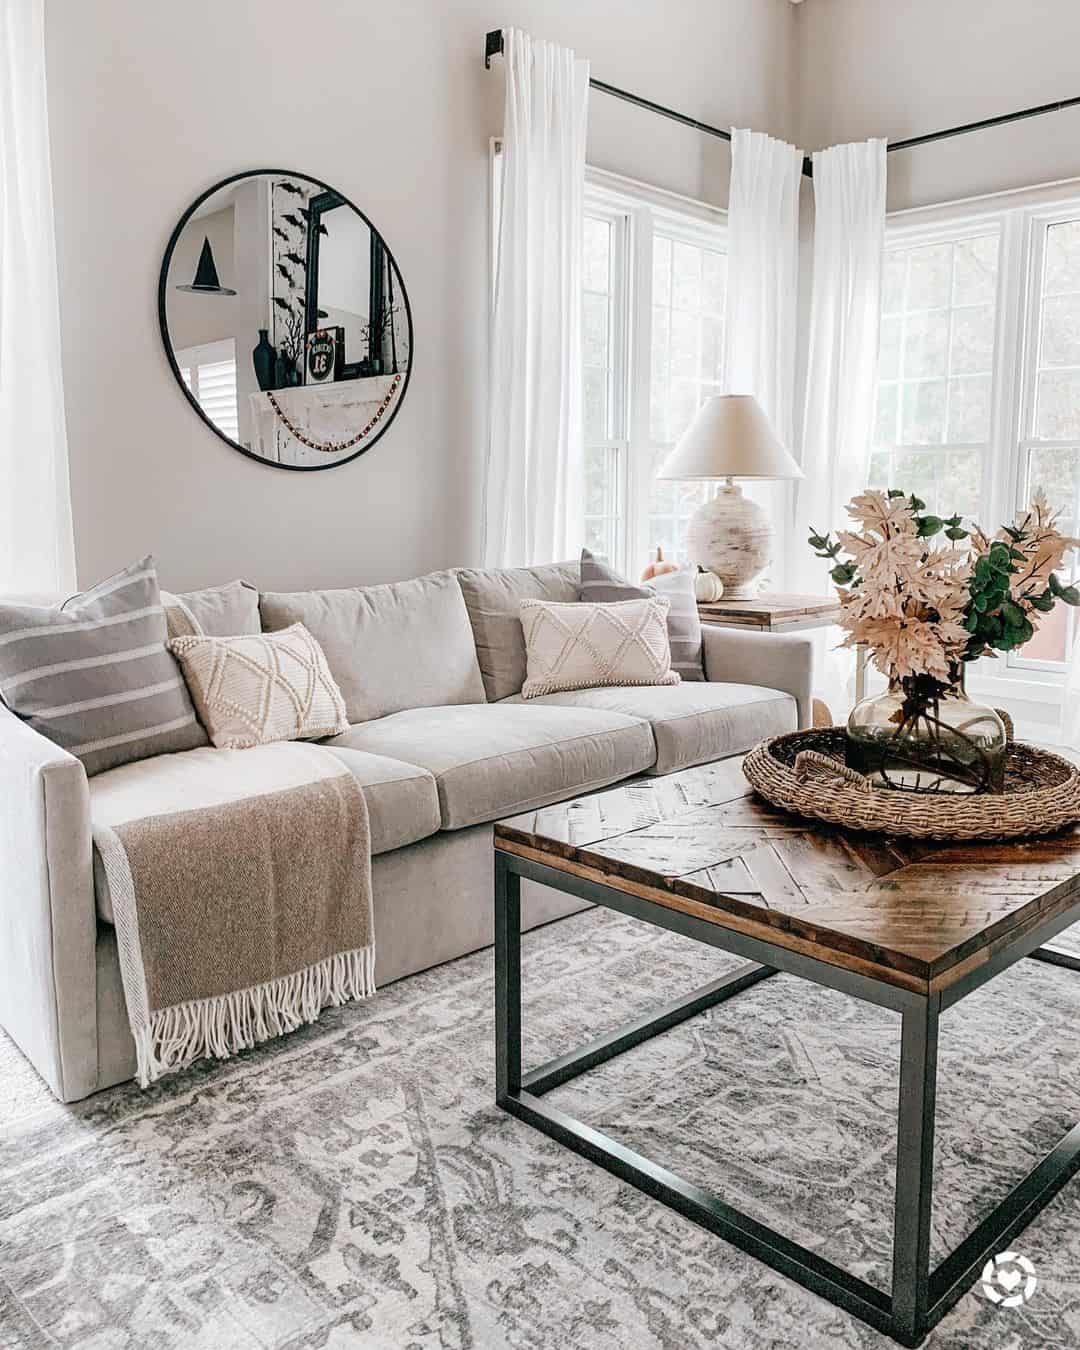 33 Mirror Above Couch Ideas That Will Add an Instant Depth